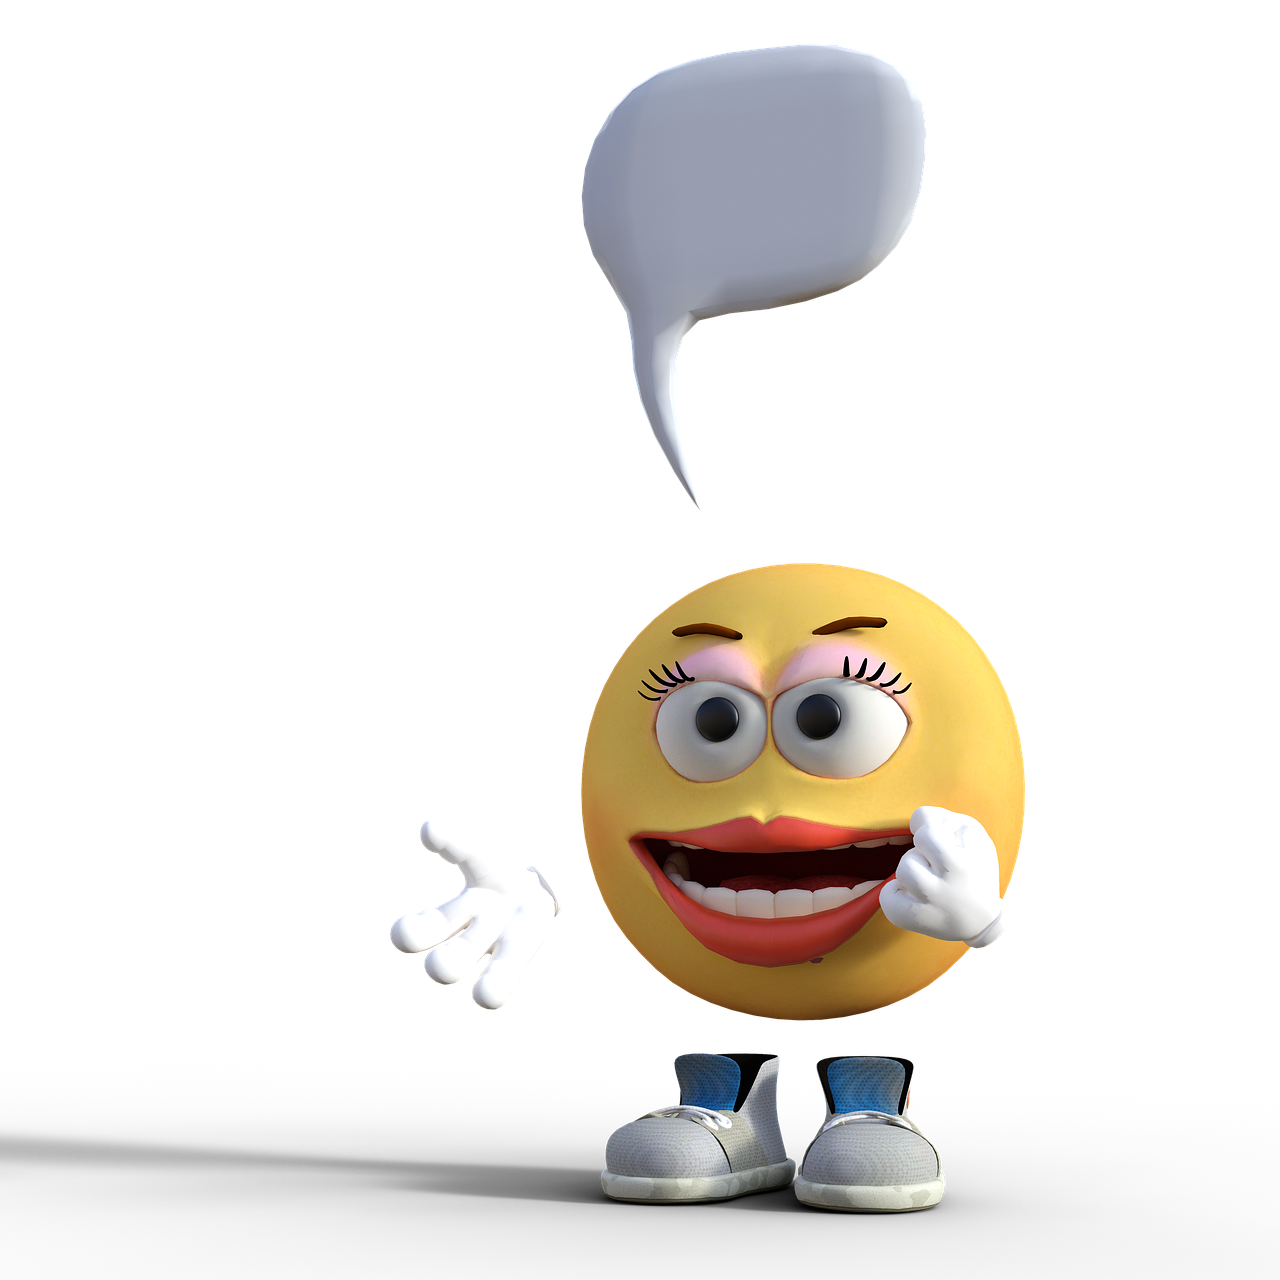 a close up of a smiley face with a speech bubble, a cartoon, digital art, 3d character model, on a black background, full body close-up shot, talking